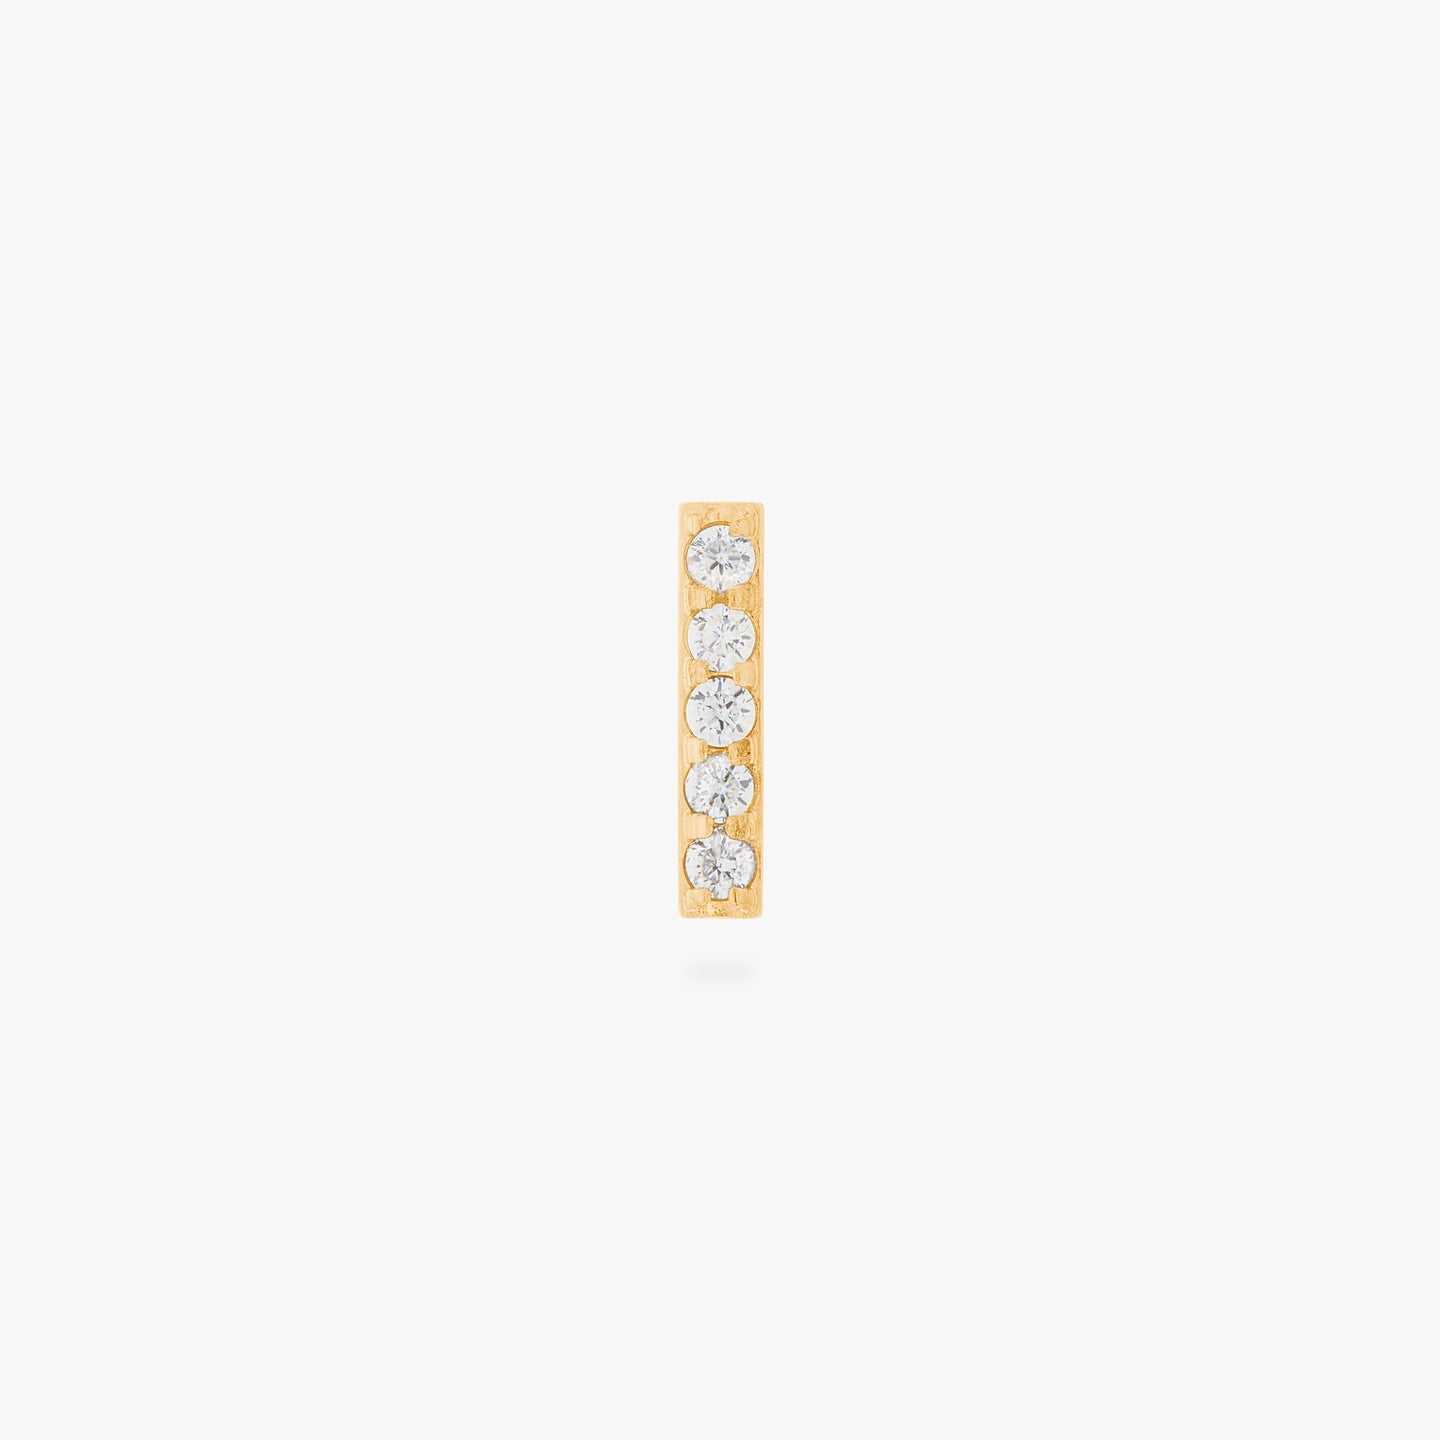 This is an image of a gold/clear bar that has 5 mini CZs in a line formation with a gold labret with a circle disc and the 